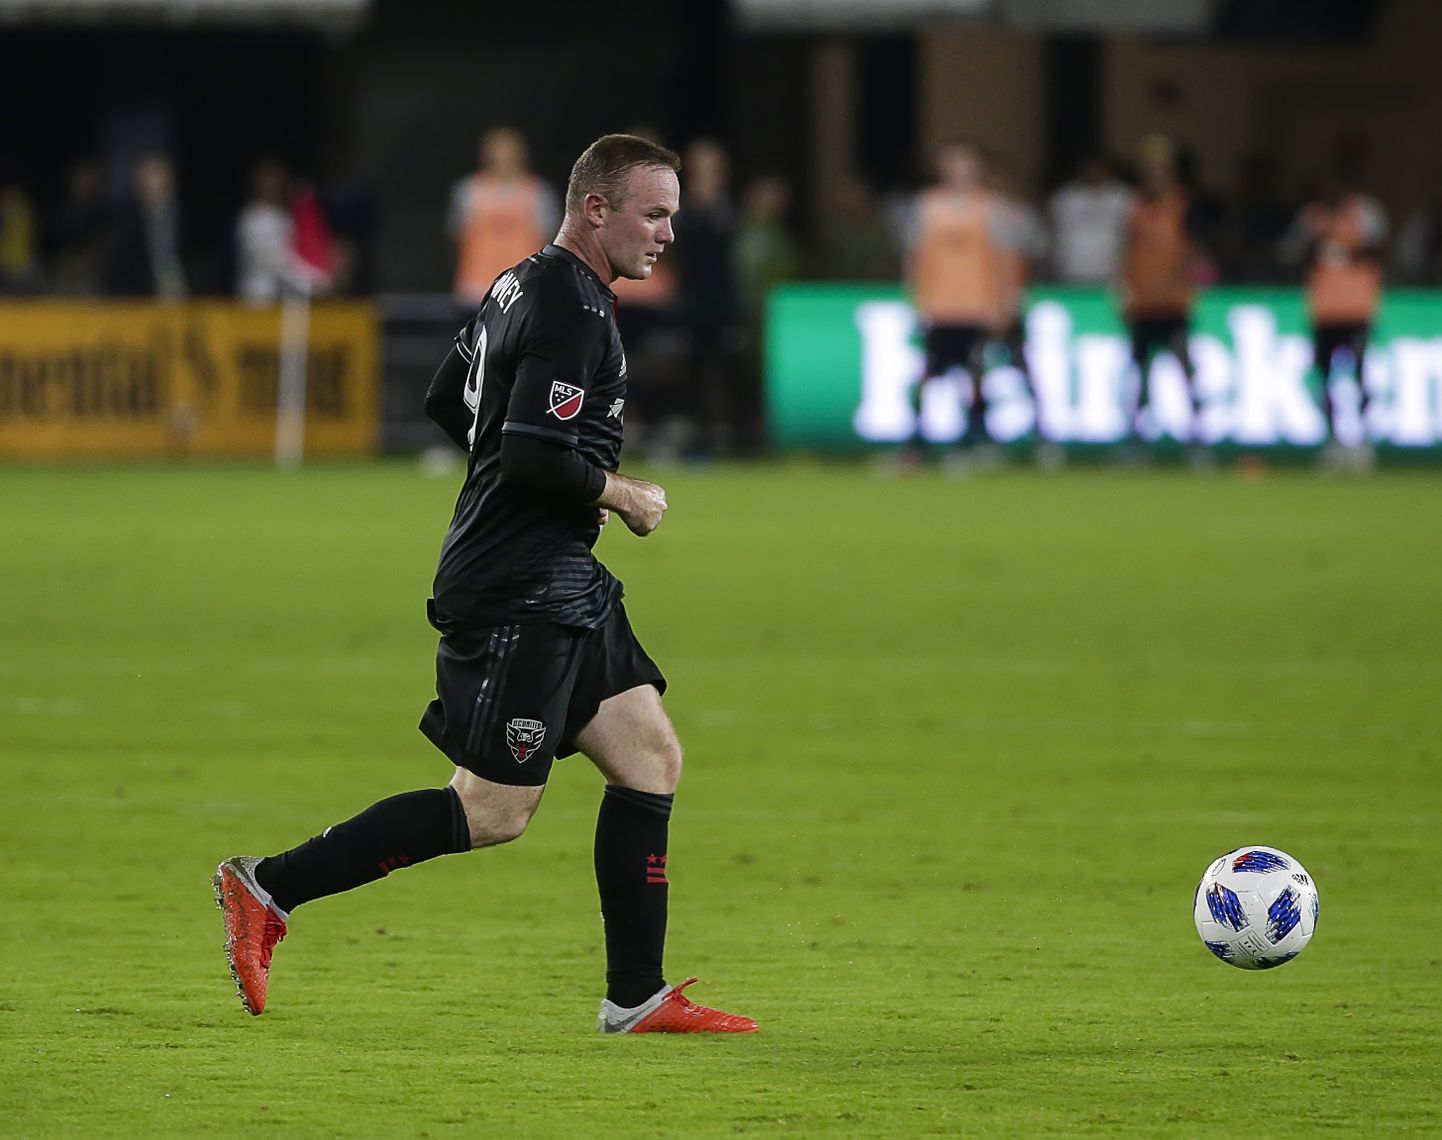 August 12, 2018: D.C. United Forward/Midfielder #9 Wayne Rooney dribbles the ball during an MLS soccer match between the D.C. United and the Orlando City SC at Audi Field in Washington DC. Justin Cooper/(Photo by Justin Cooper/CSM/Sipa USA)